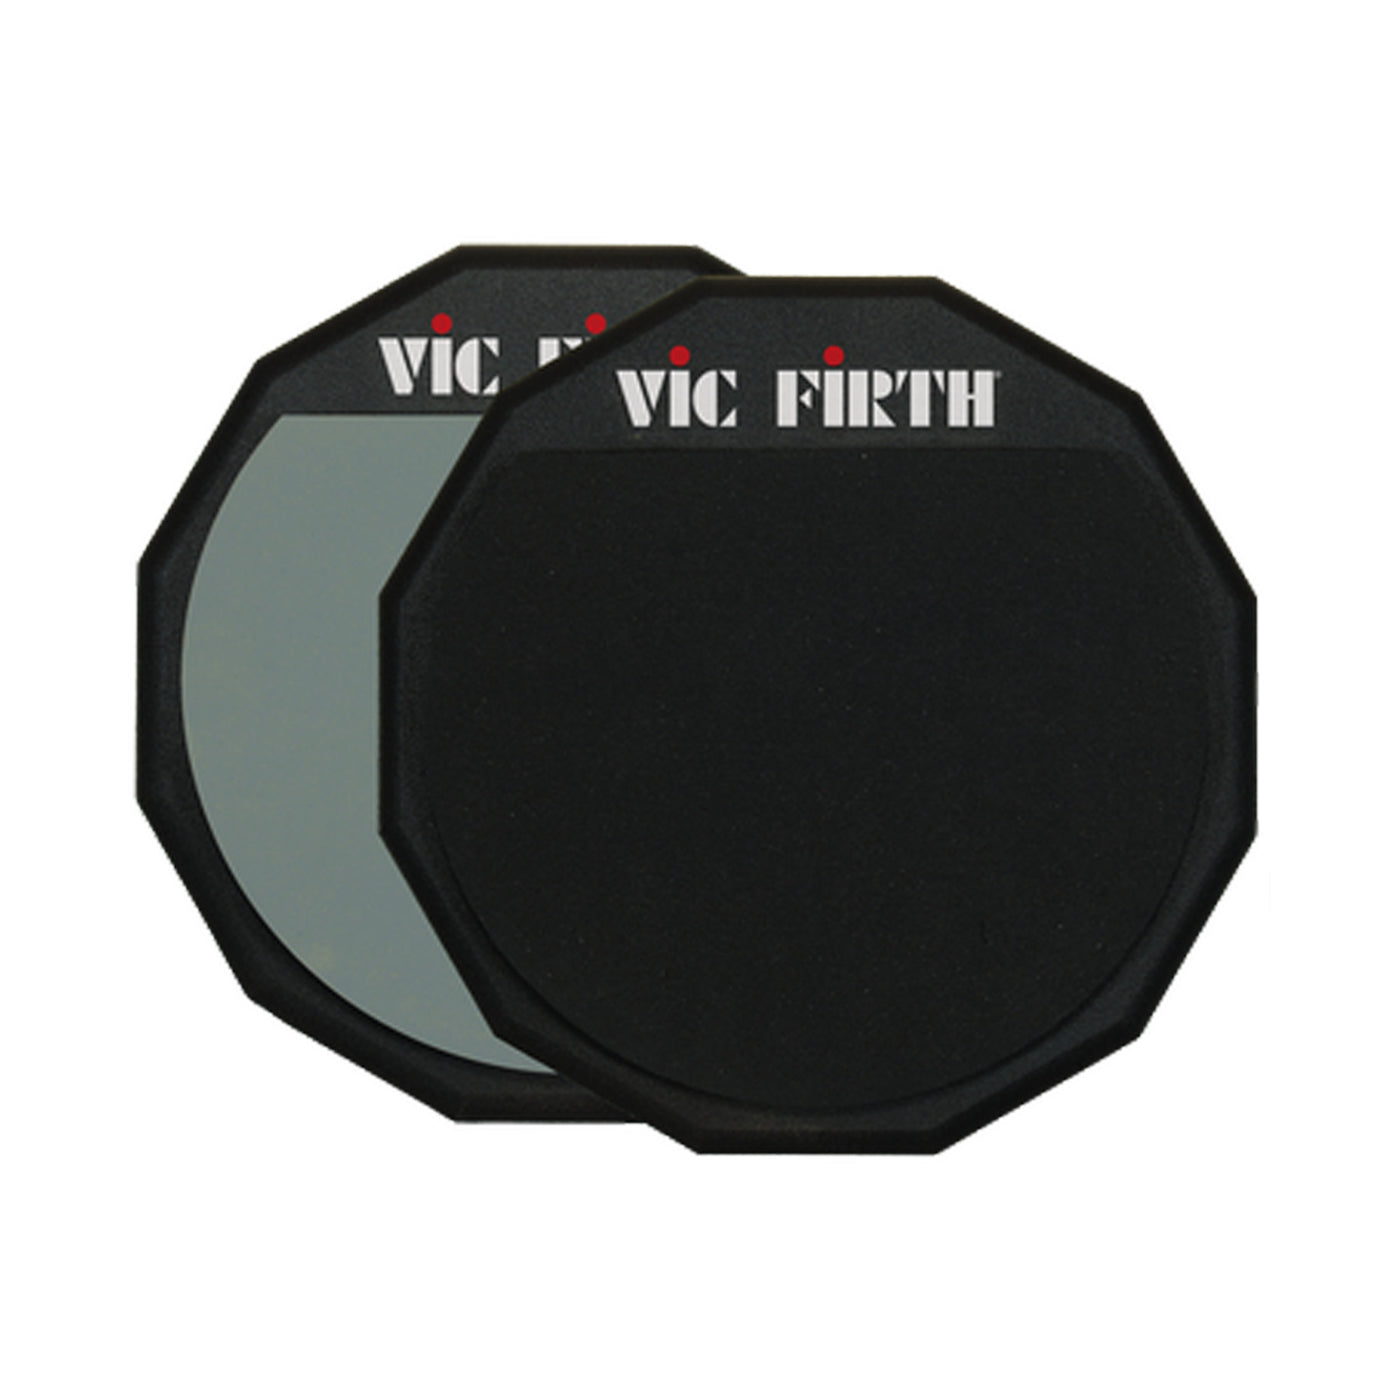 Vic Firth Double Sided Practice Pad - 12"